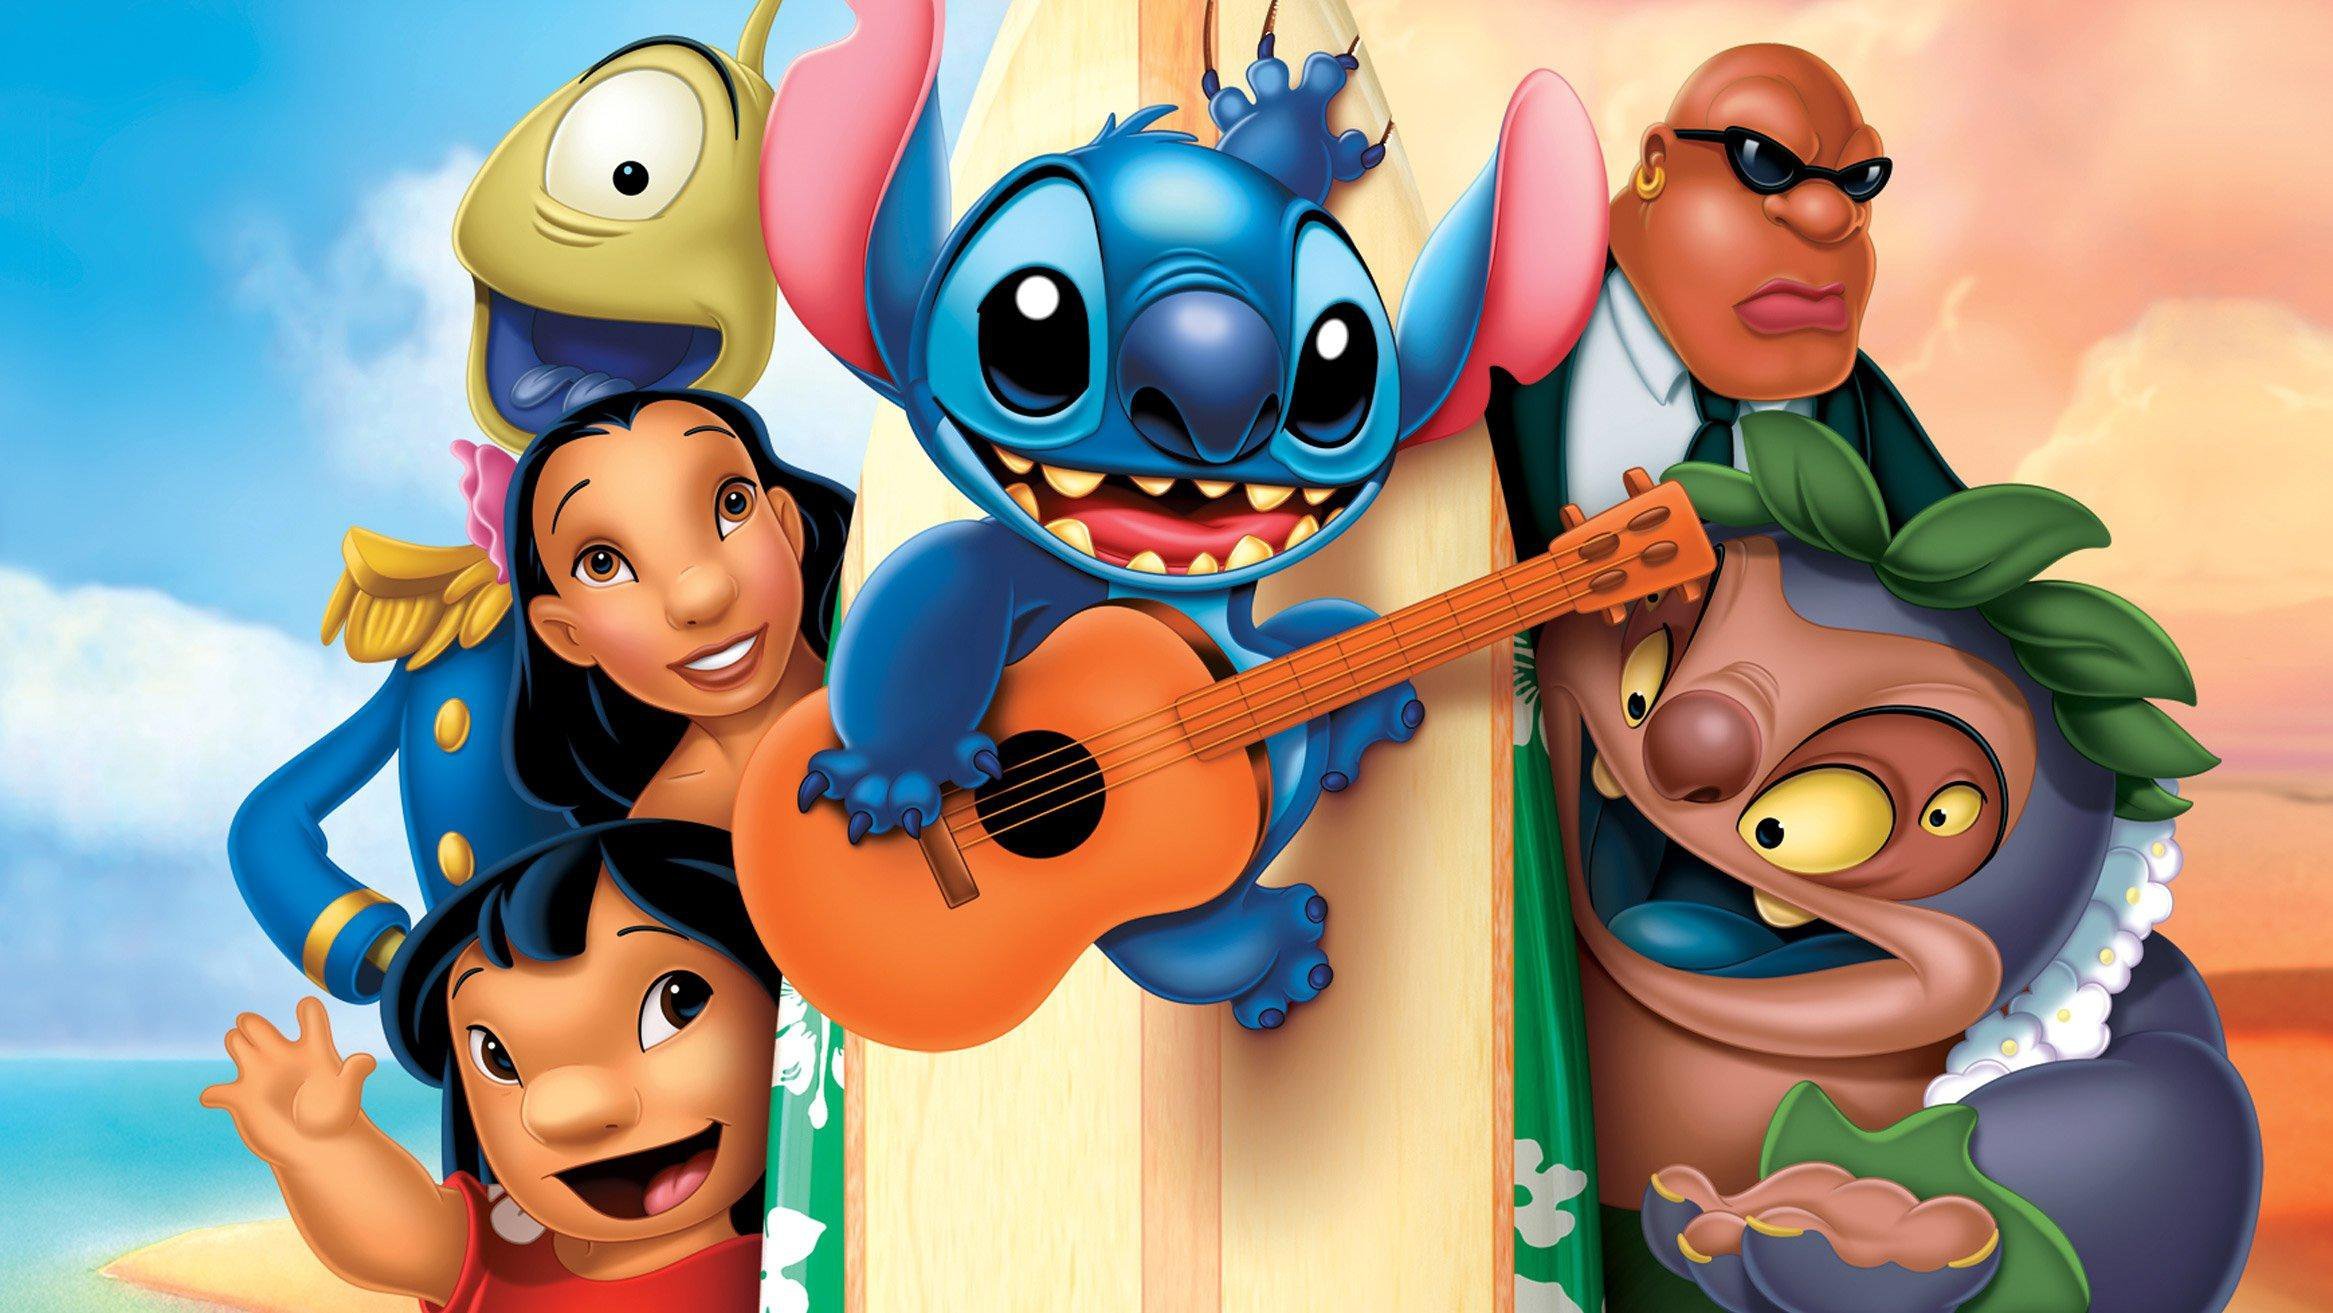 Disney has already found an actress for the role of Lilo in the Lilo and Stitch live action